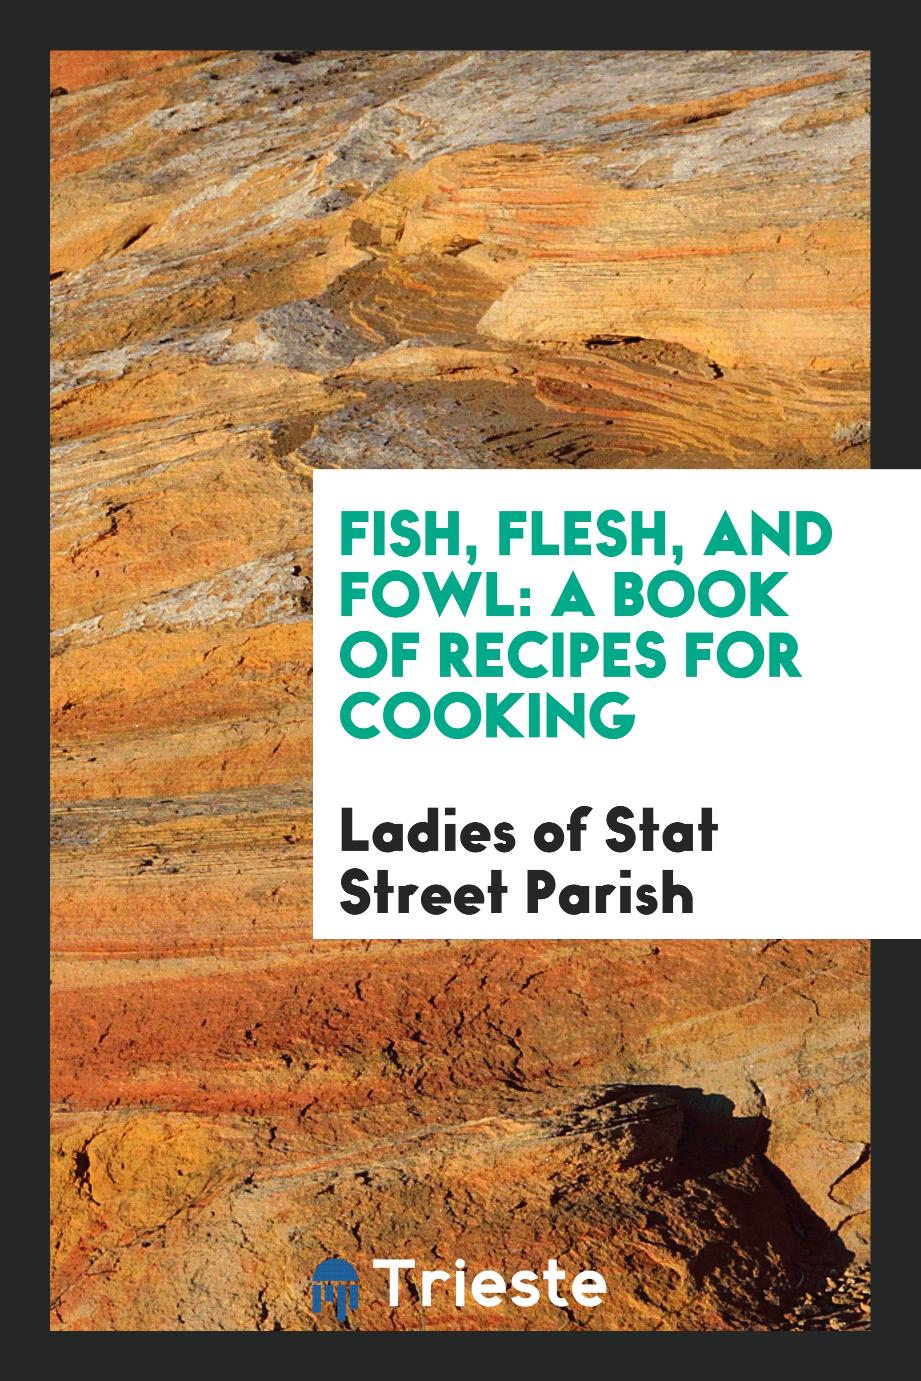 Fish, Flesh, and Fowl: A Book of Recipes for Cooking